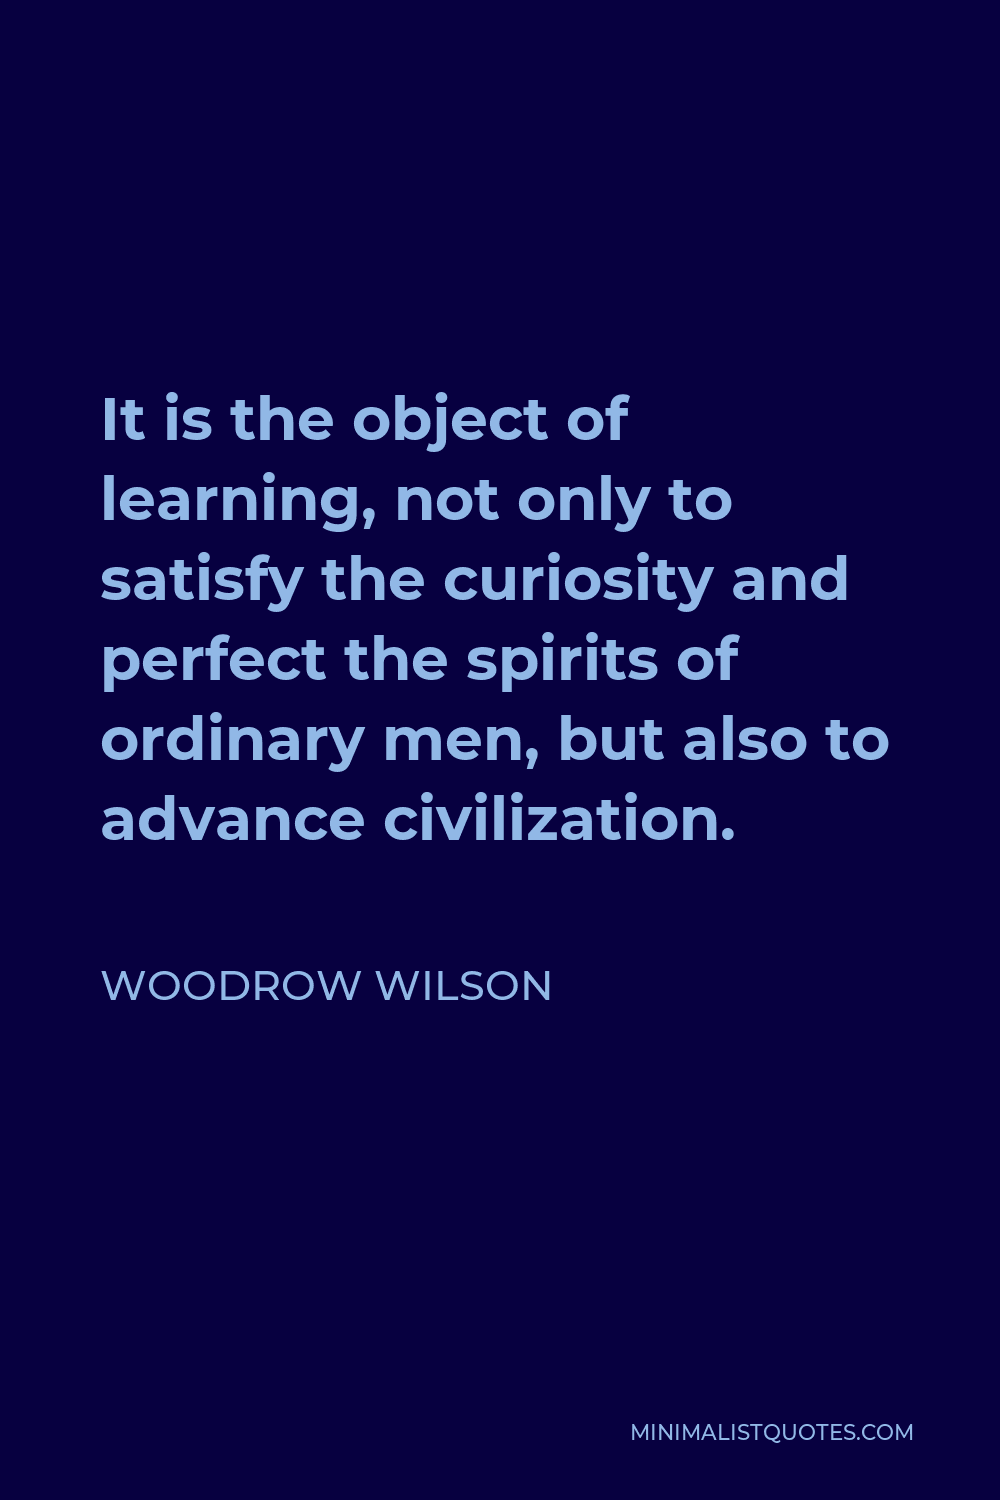 Woodrow Wilson Quote - It is the object of learning, not only to satisfy the curiosity and perfect the spirits of ordinary men, but also to advance civilization.